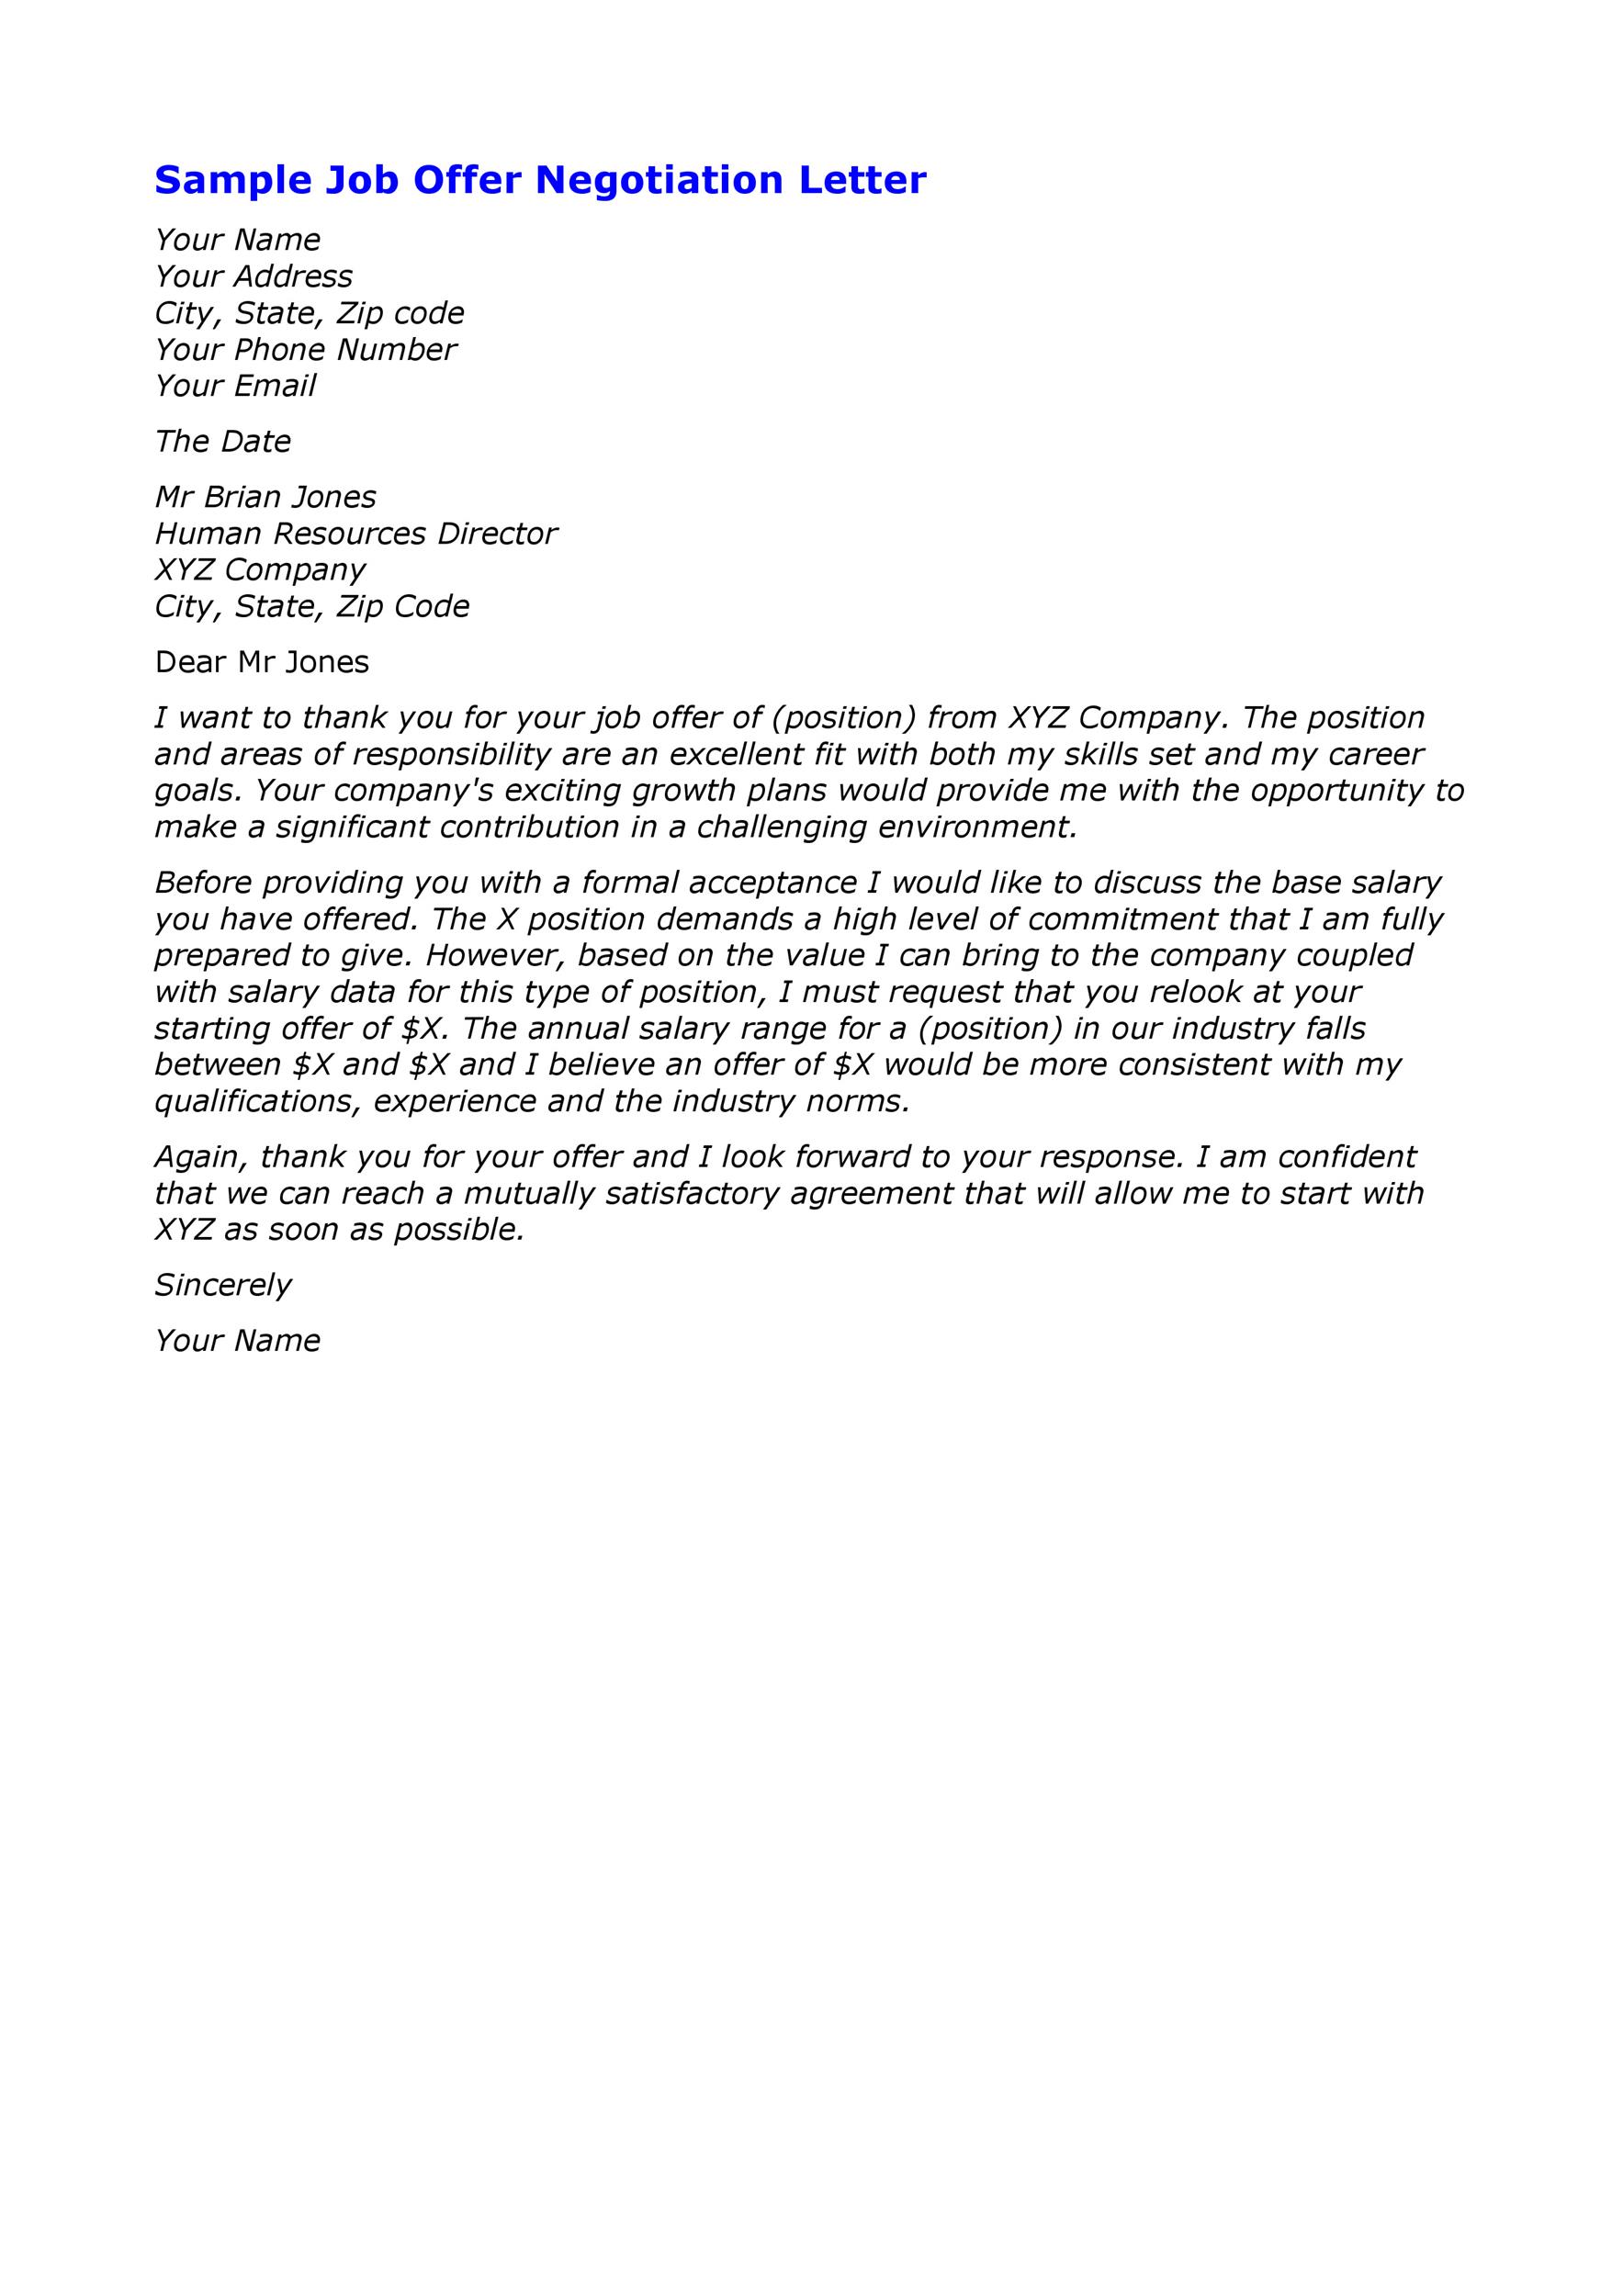 Free salary negotiation letter 02